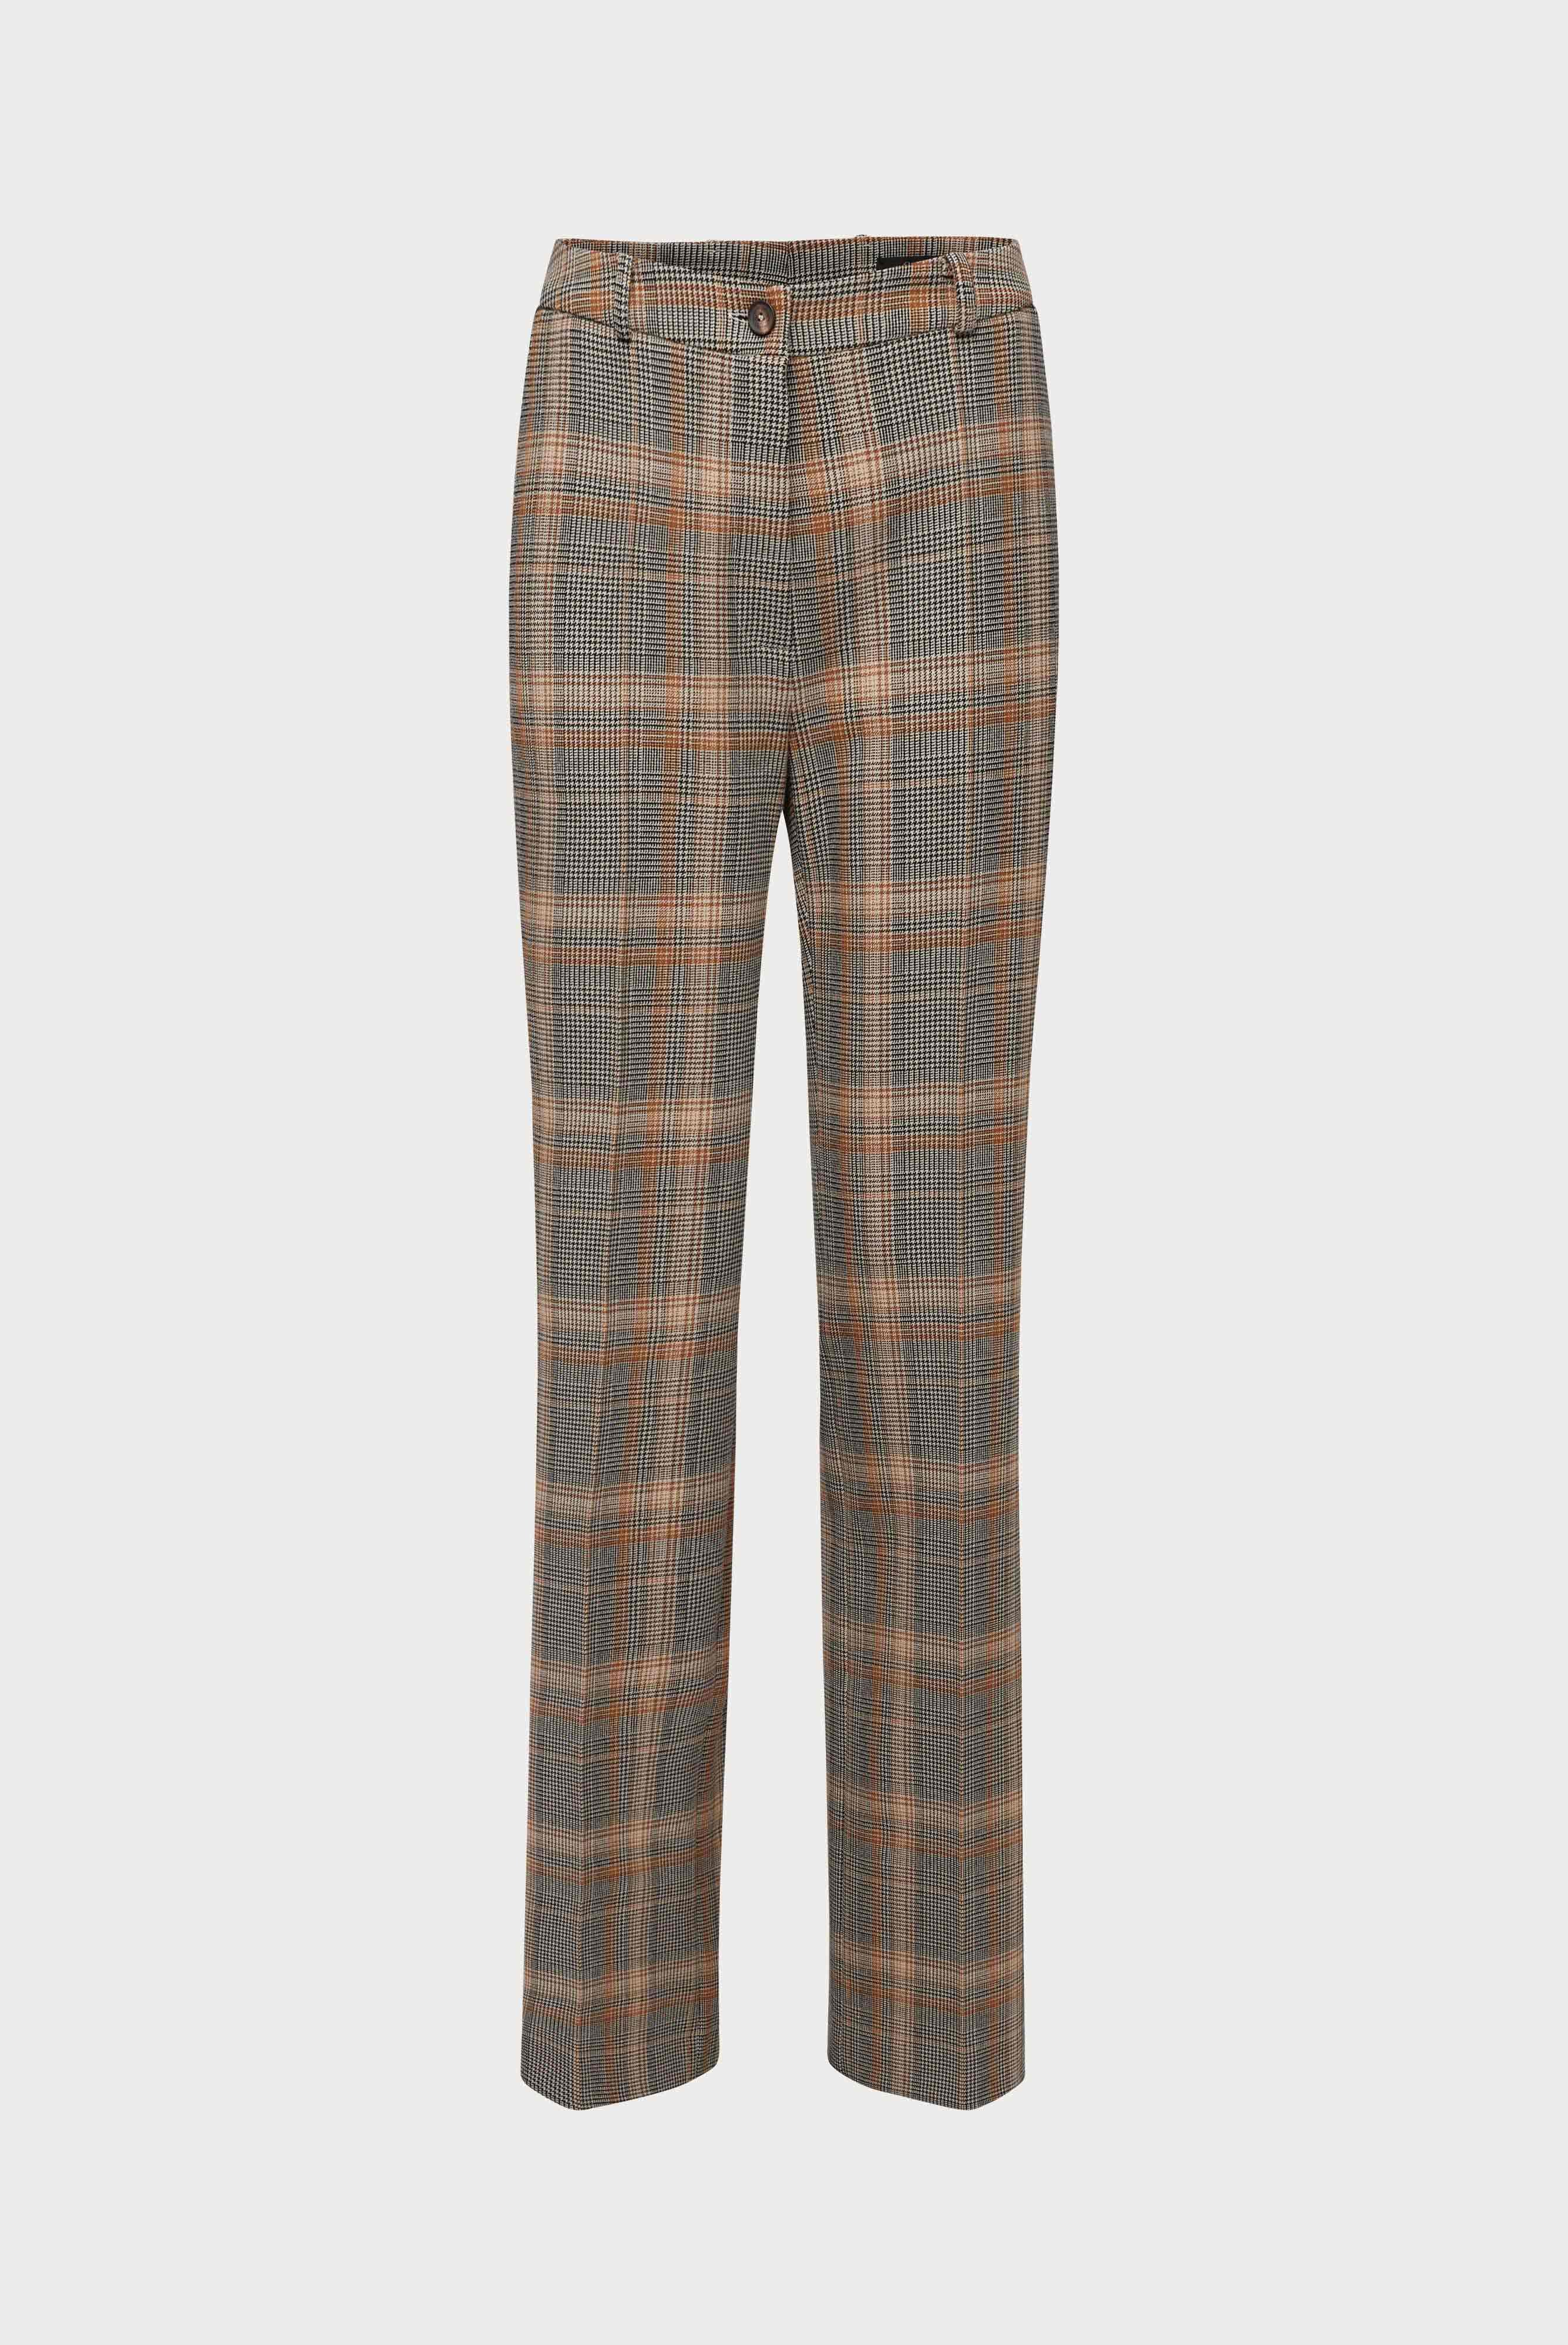 Jeans & Trousers+Checked Trousers+05.6354..H51000.150.32